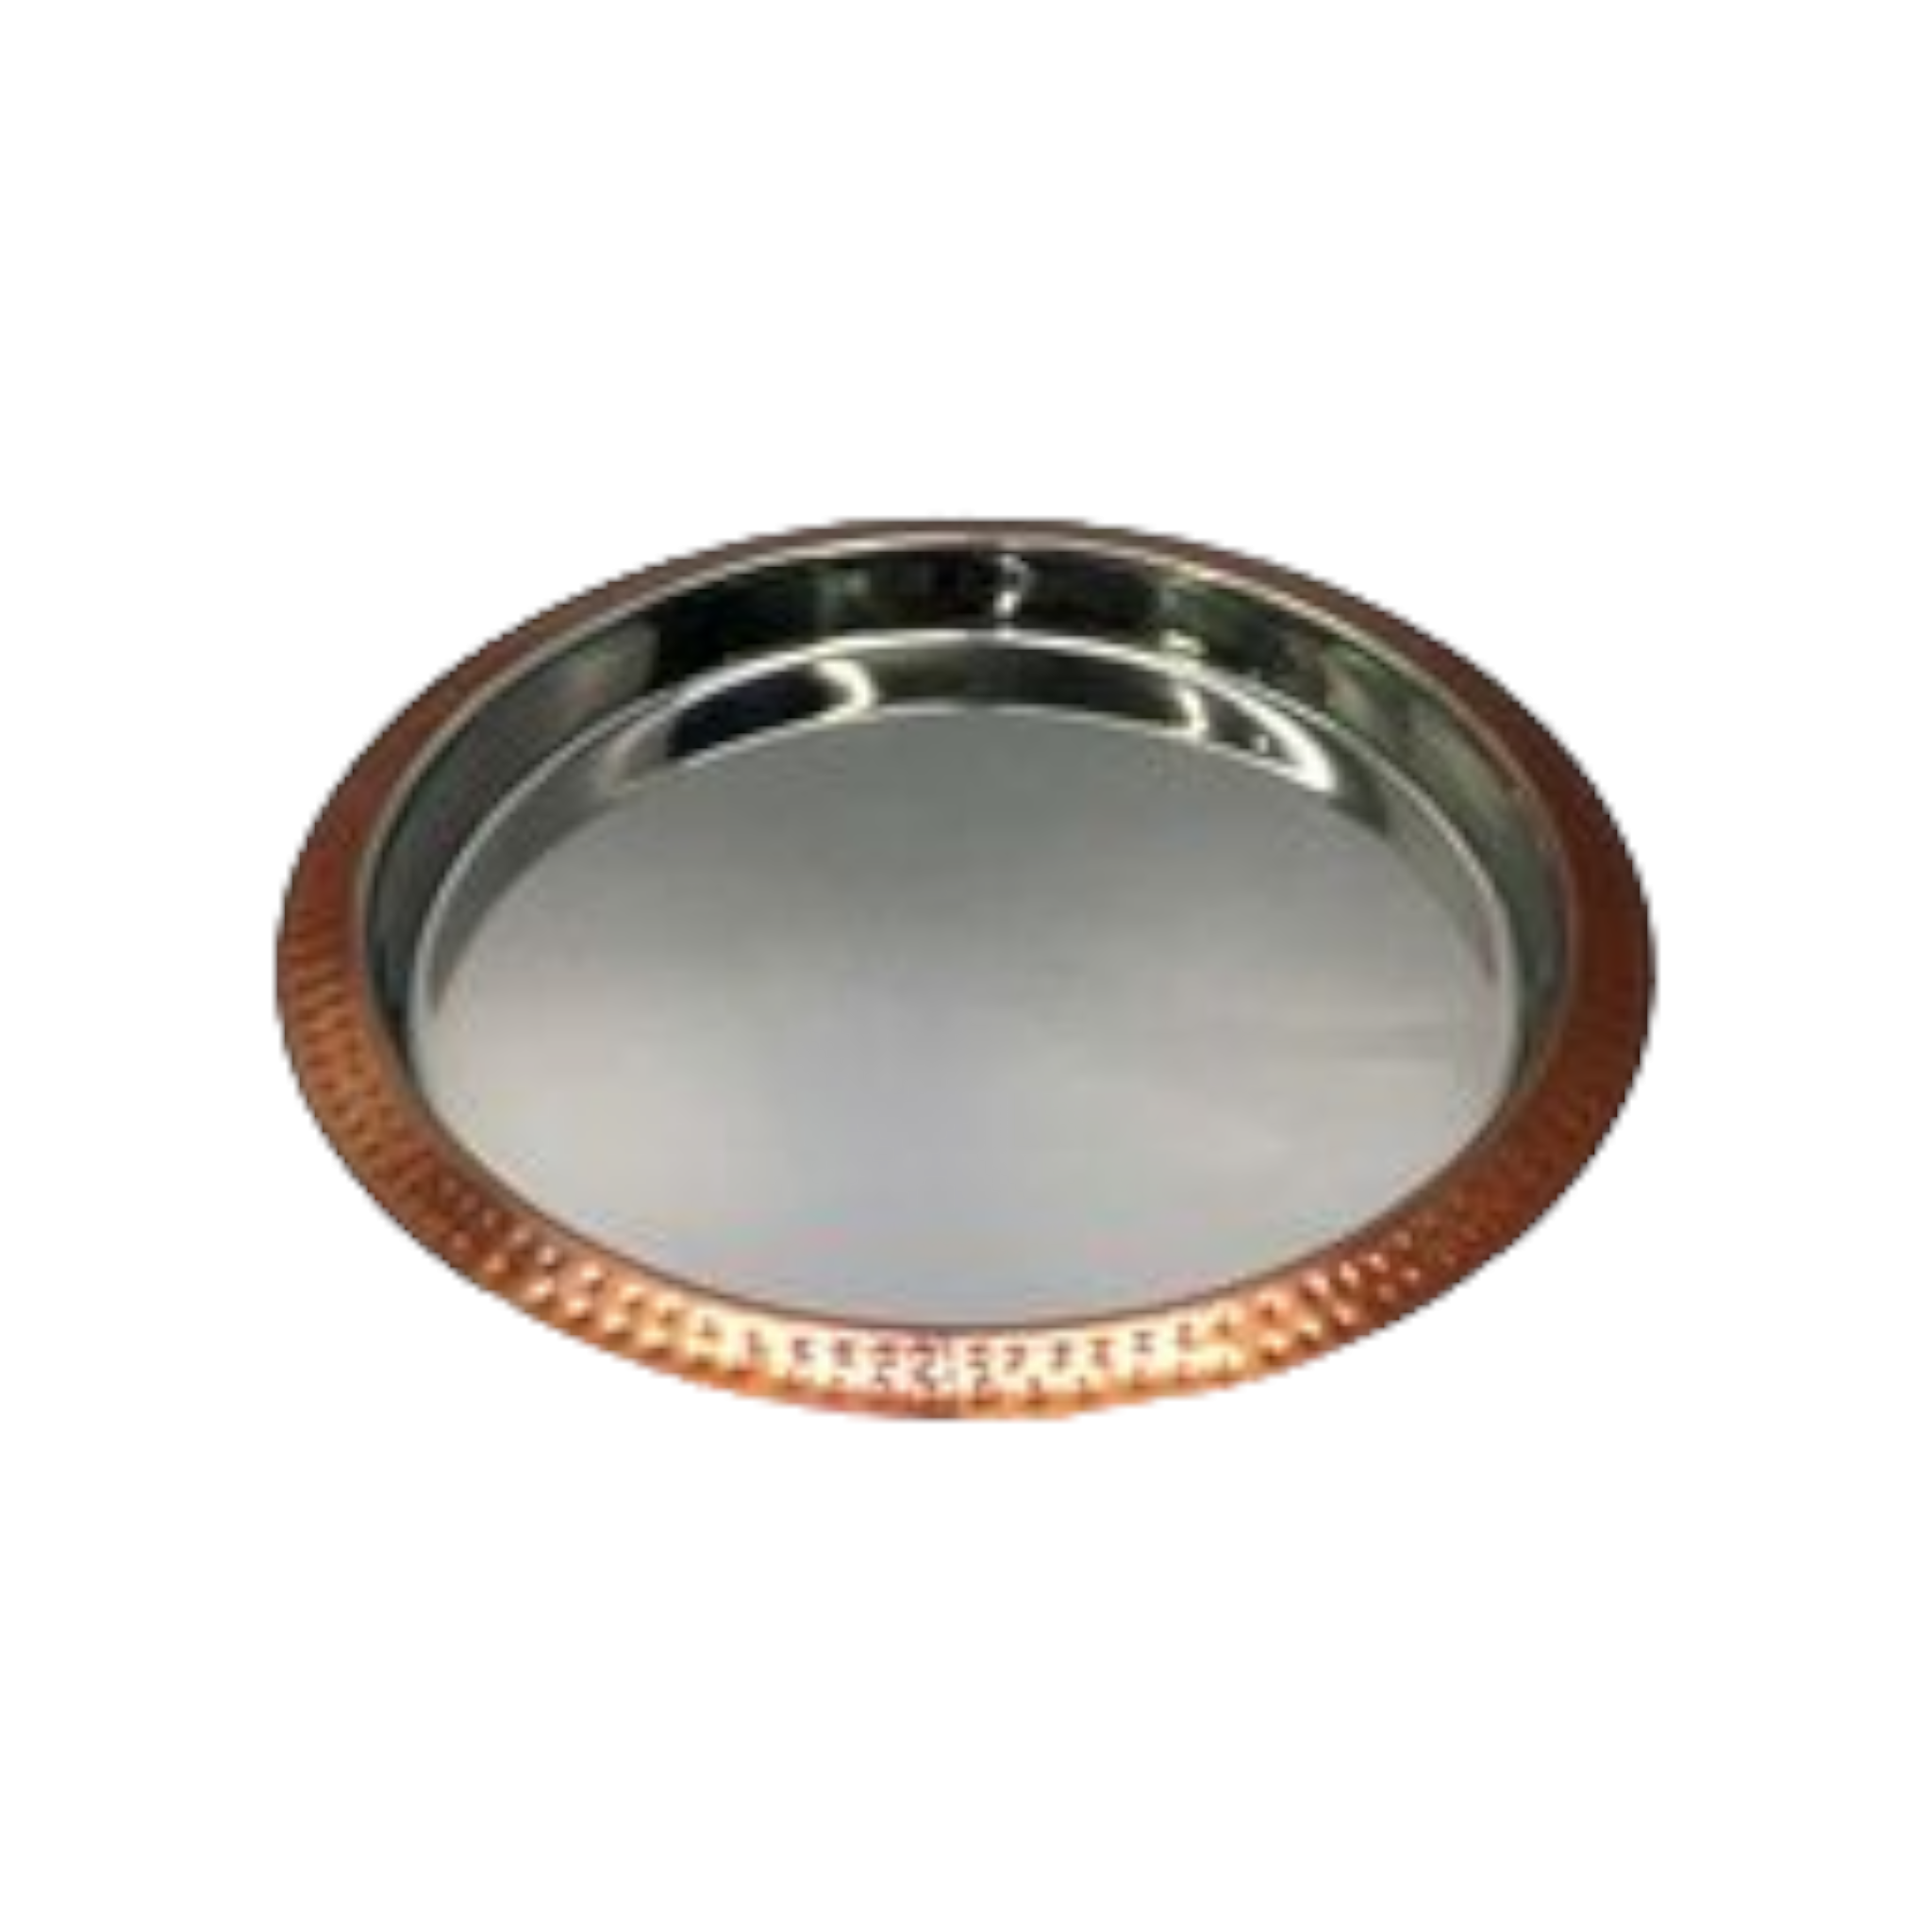 Serving Tray 36cm Copper Finish Hammered Edge / Lacquered Stainless Steel